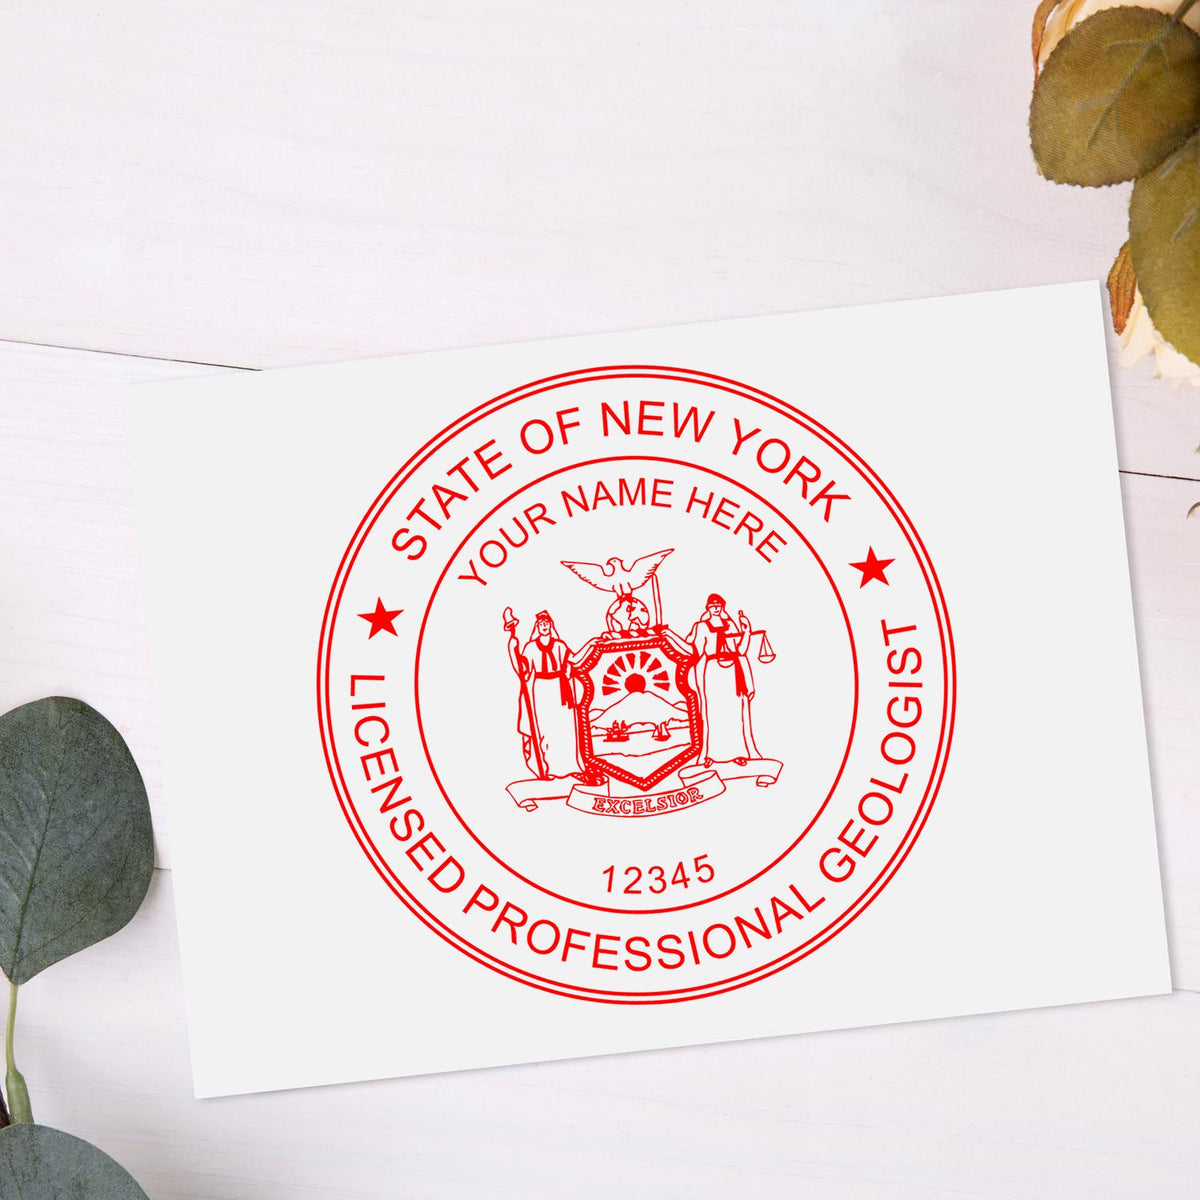 A lifestyle photo showing a stamped image of the New York Professional Geologist Seal Stamp on a piece of paper